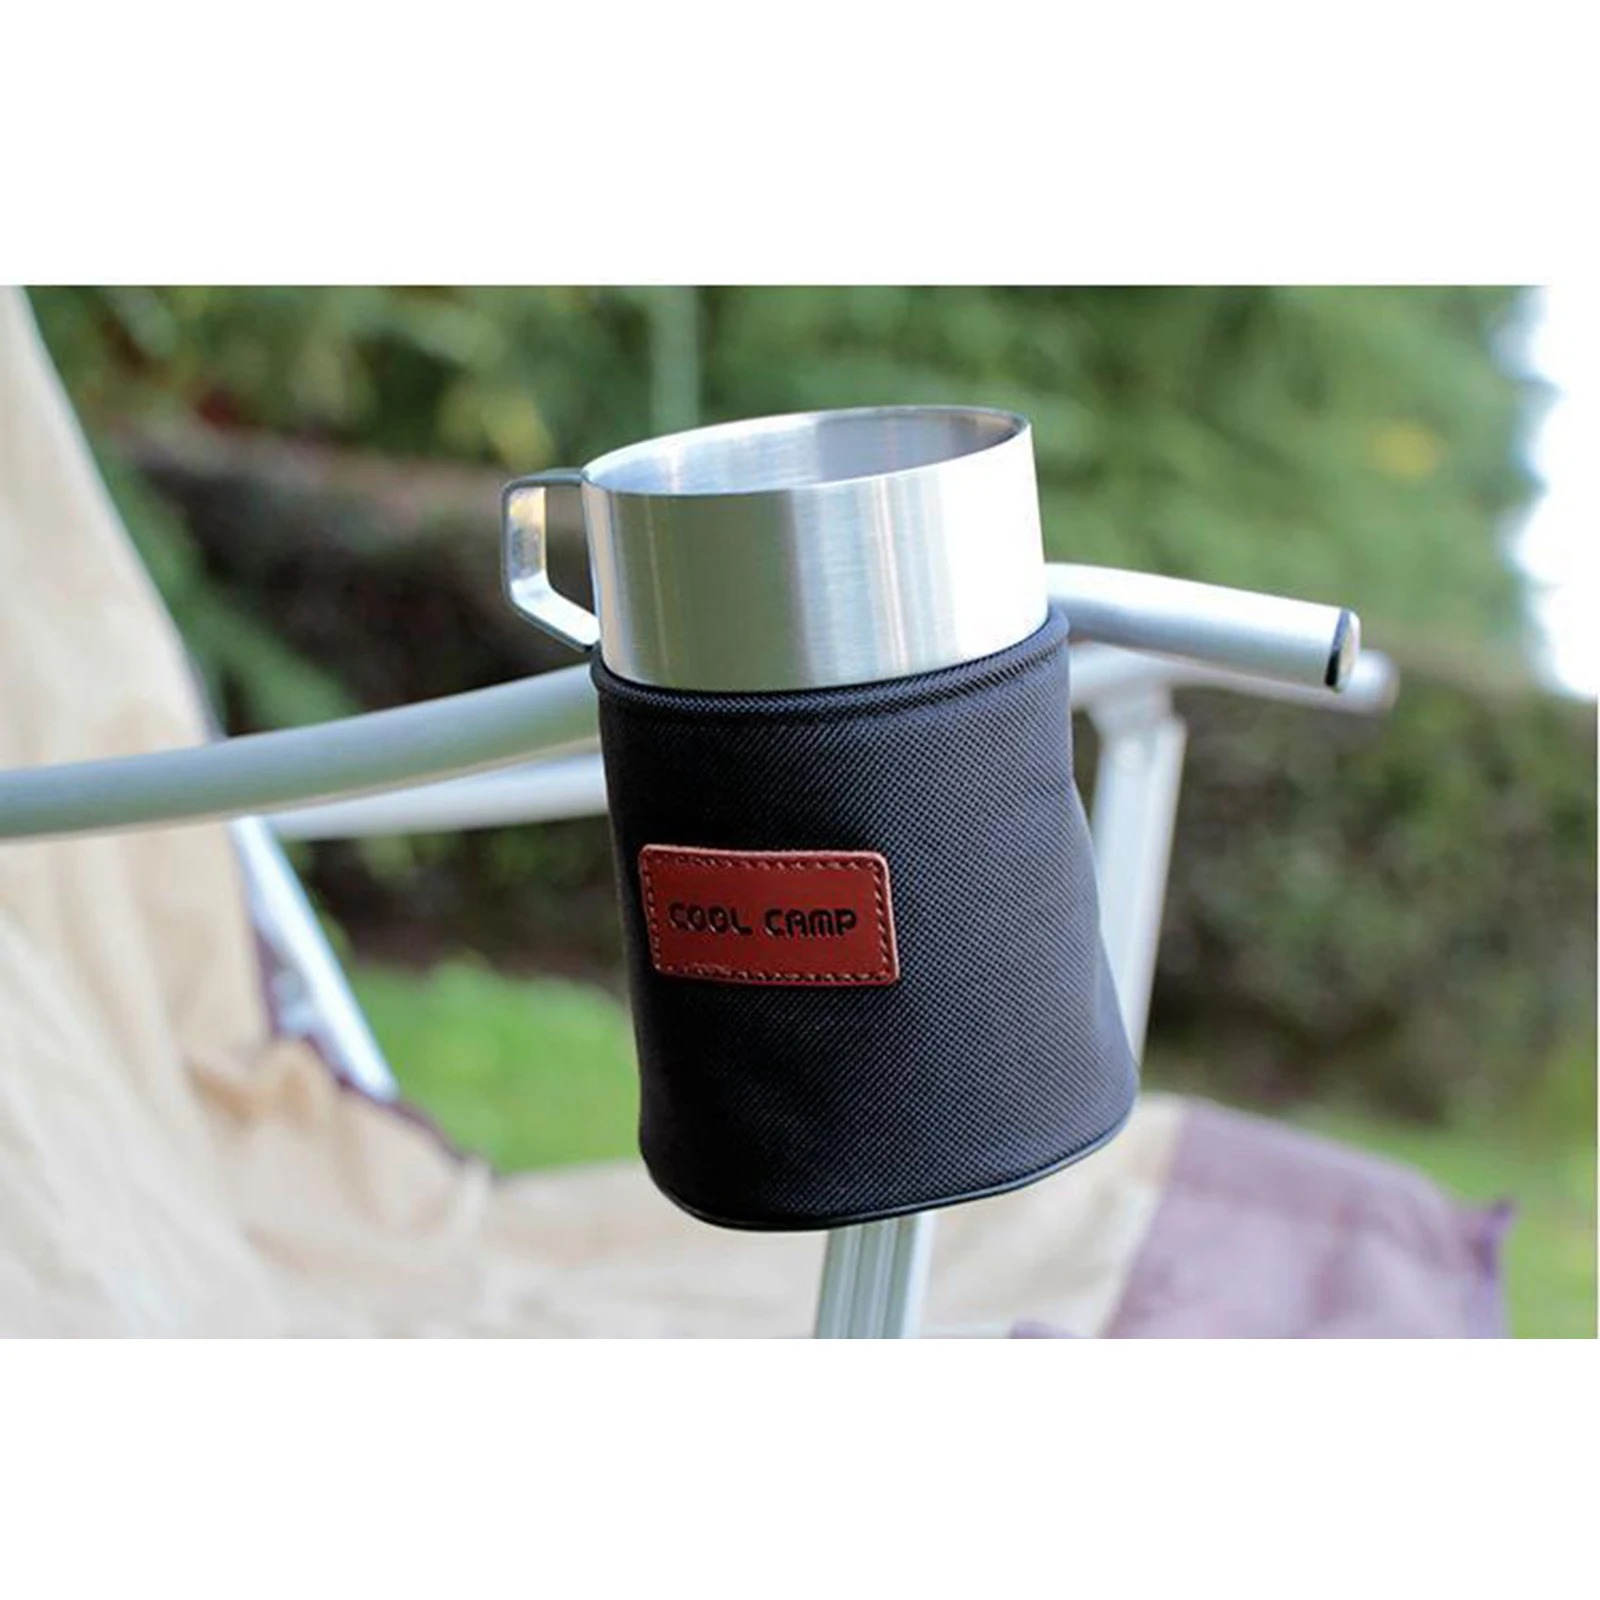 Universal Bike Water Cup Holder Organizer Drink Water Bottle Mount Stand Chair Side Storage Bag For Outdoor Cycling Fishing